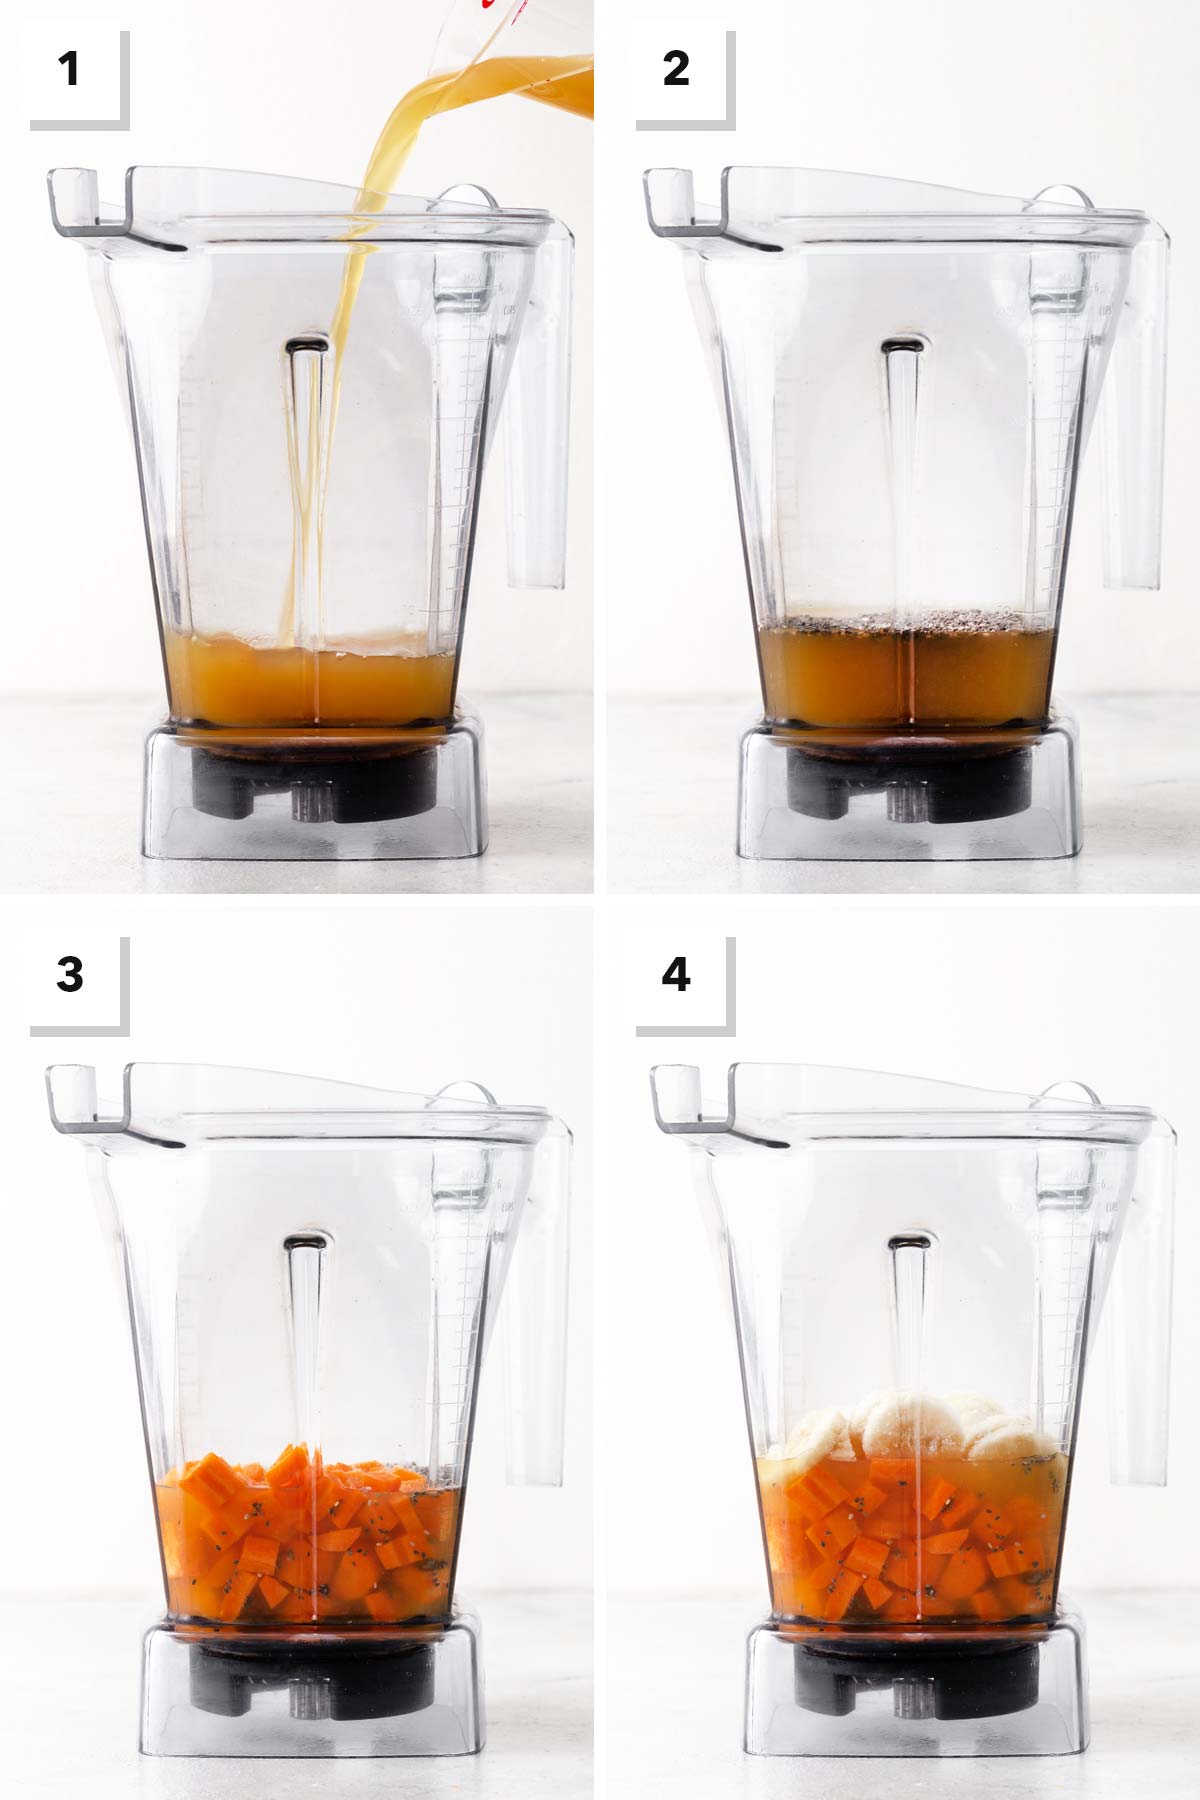 Steps for making a carrot smoothie.